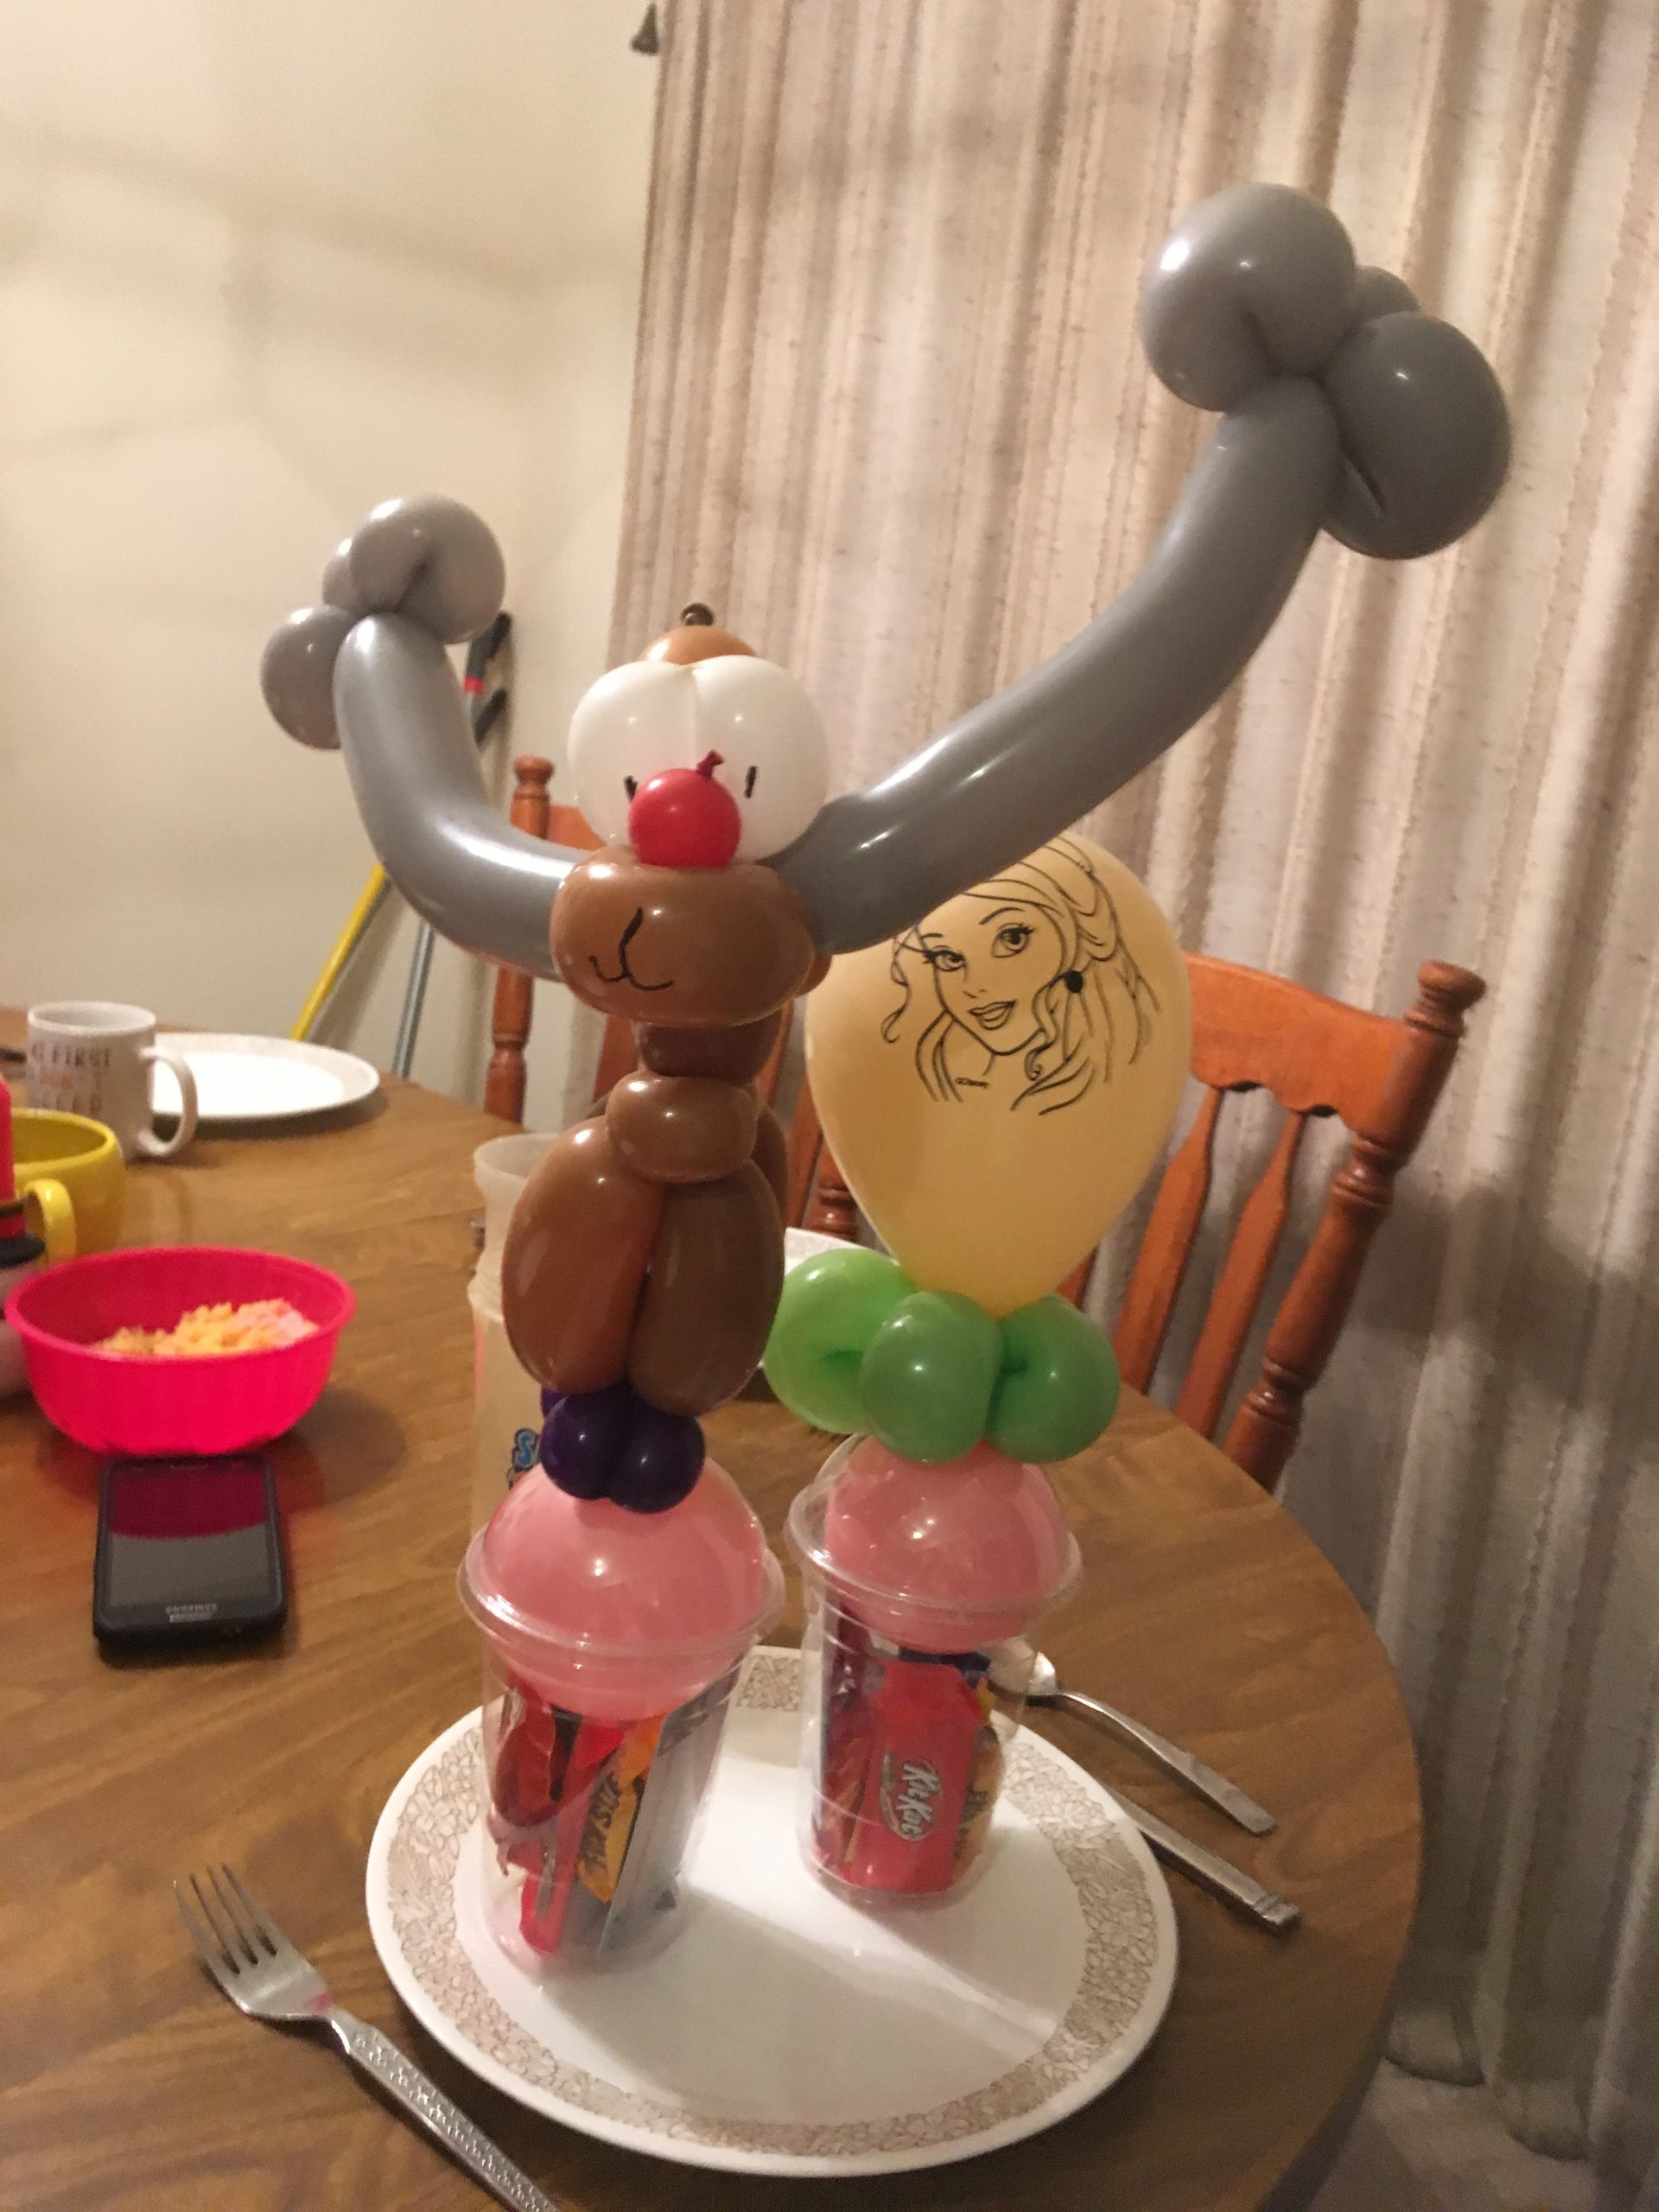 Balloon deer and princess candy cup (twisted balloons aren't safe for children under 3 years old, so the Princess balloon for the younger sister)